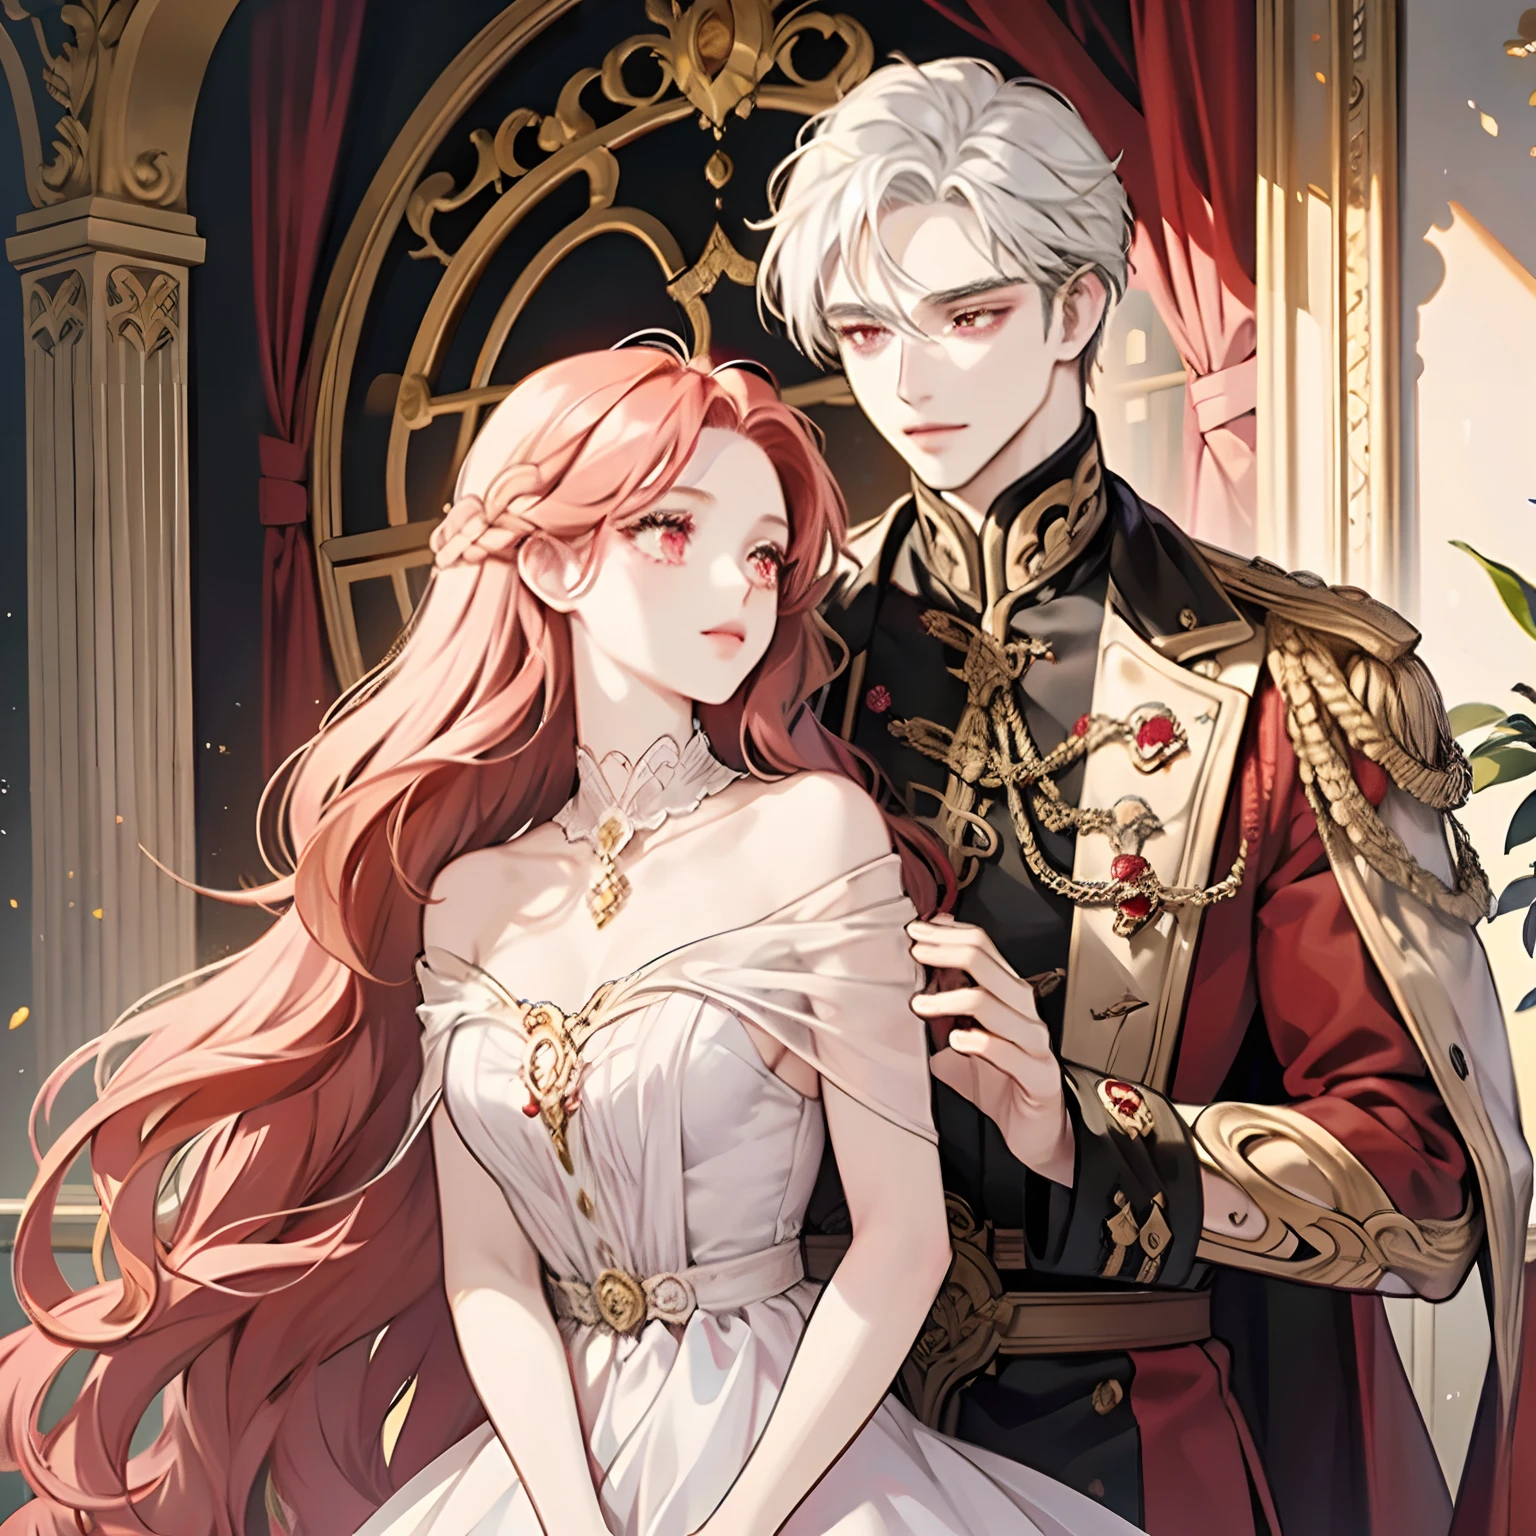 1 man with long straight red hair and golden eyes hugging 1 woman with wavy white hair and pink eyes., Royal style family, Elegant, High Quality, high-detail, detailed face, masterpiece, stand